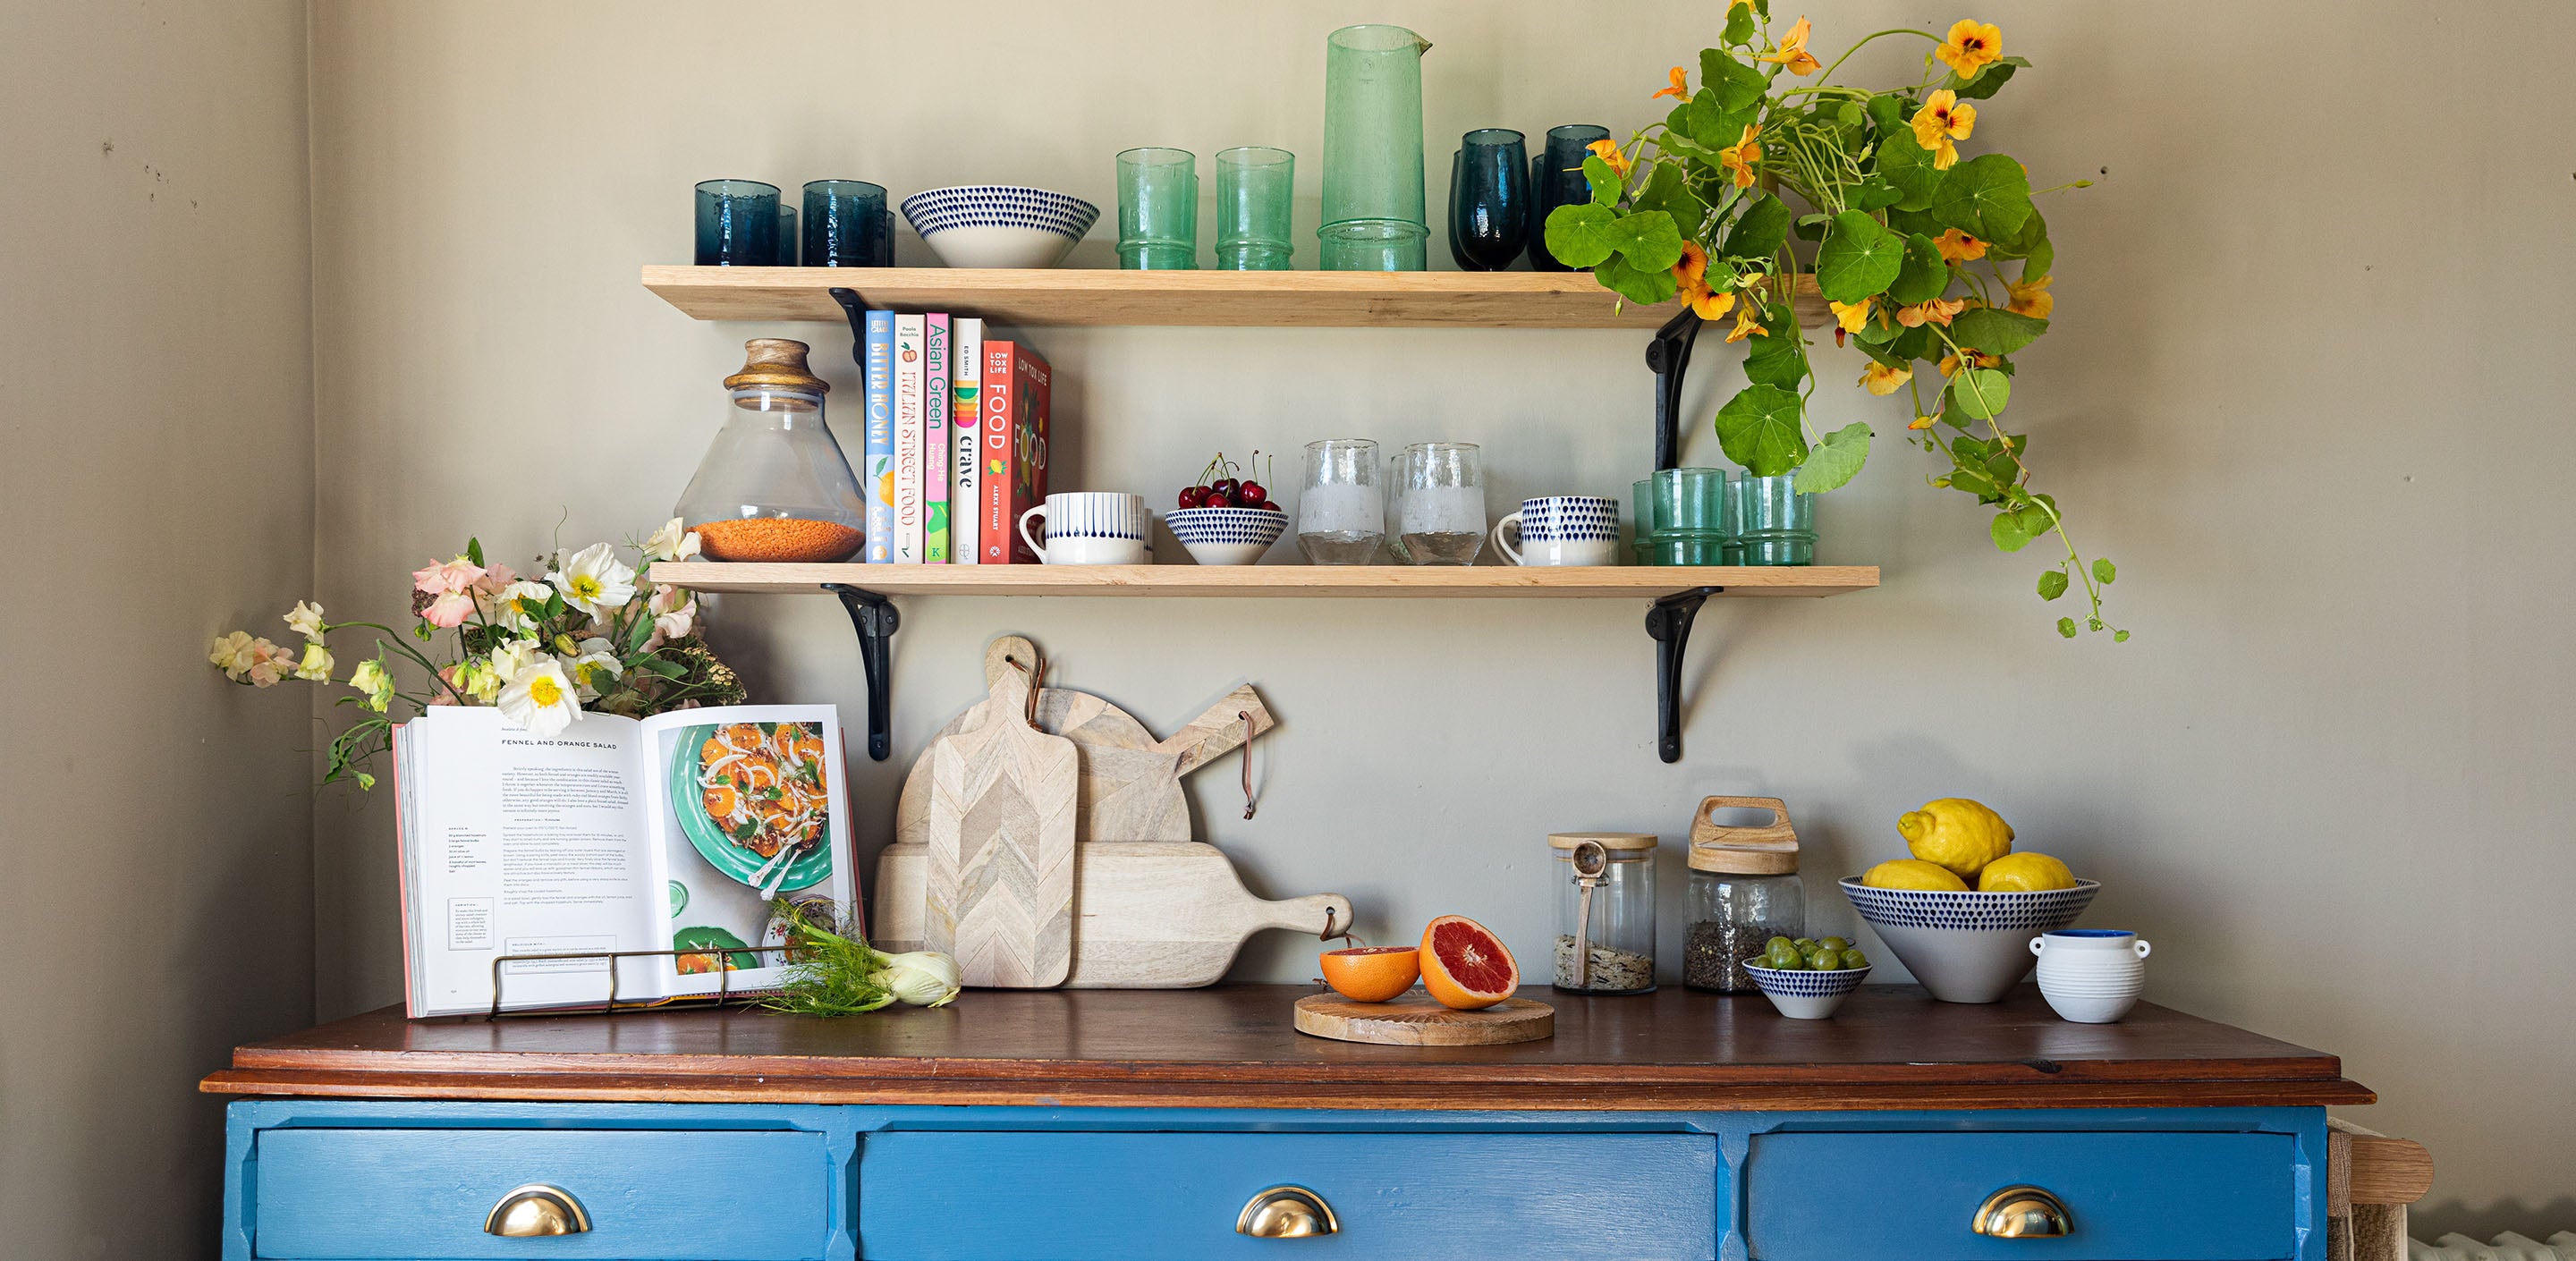 Blue kitchen dresser with shelves above and kitchenware